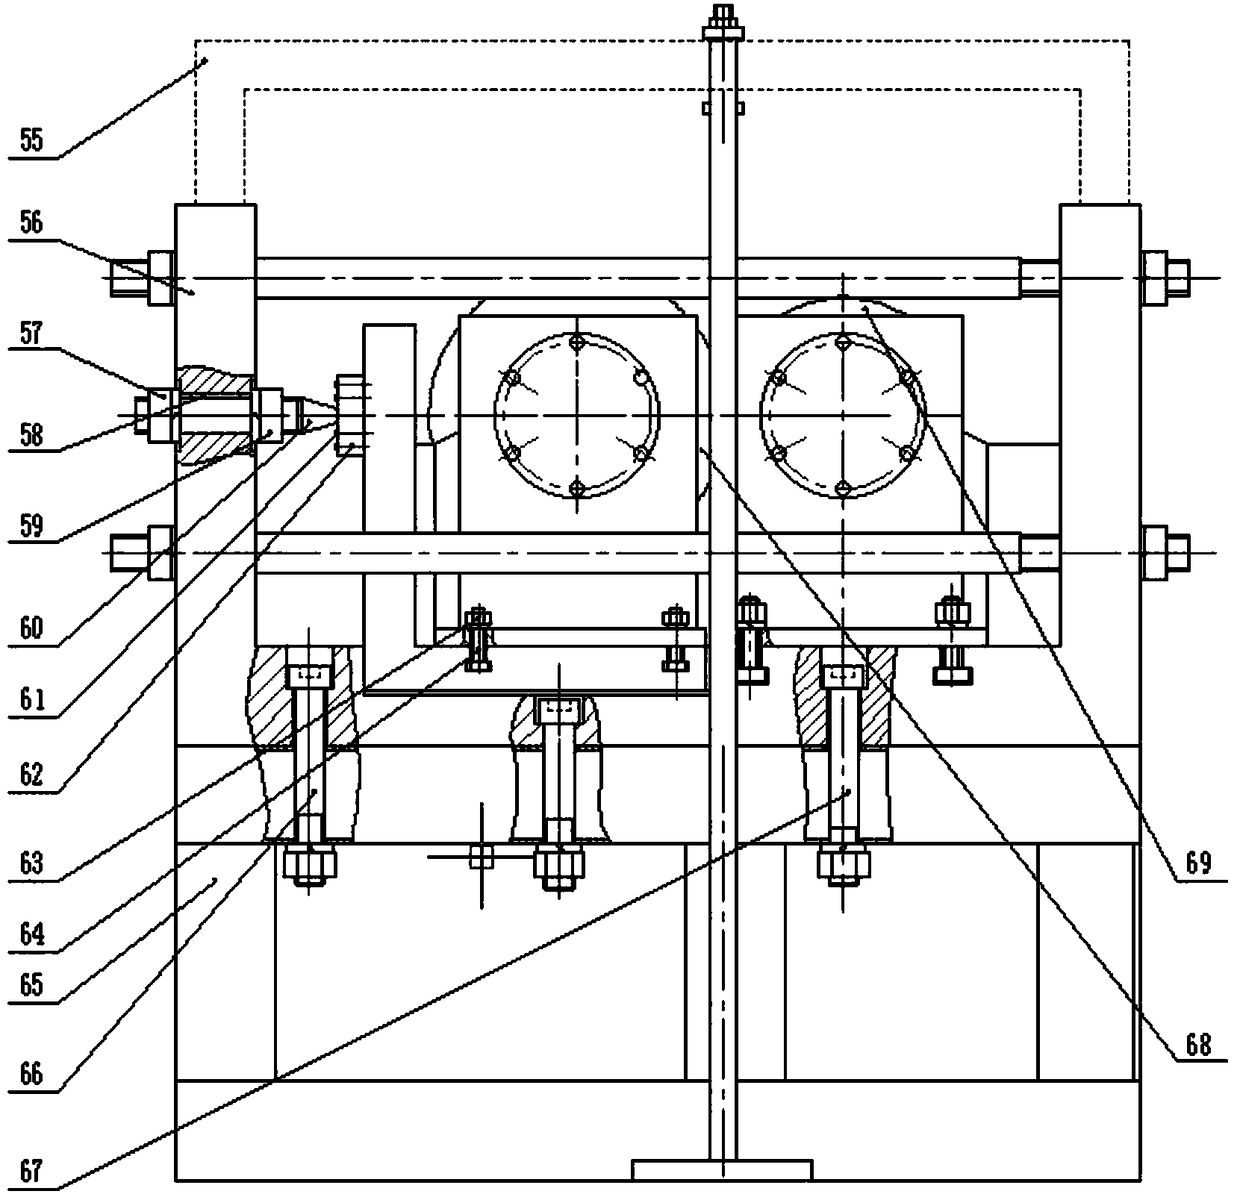 Line contact rolling-slipping friction vibration noise test bed and line contact rolling-slipping friction vibration noise test analysis method